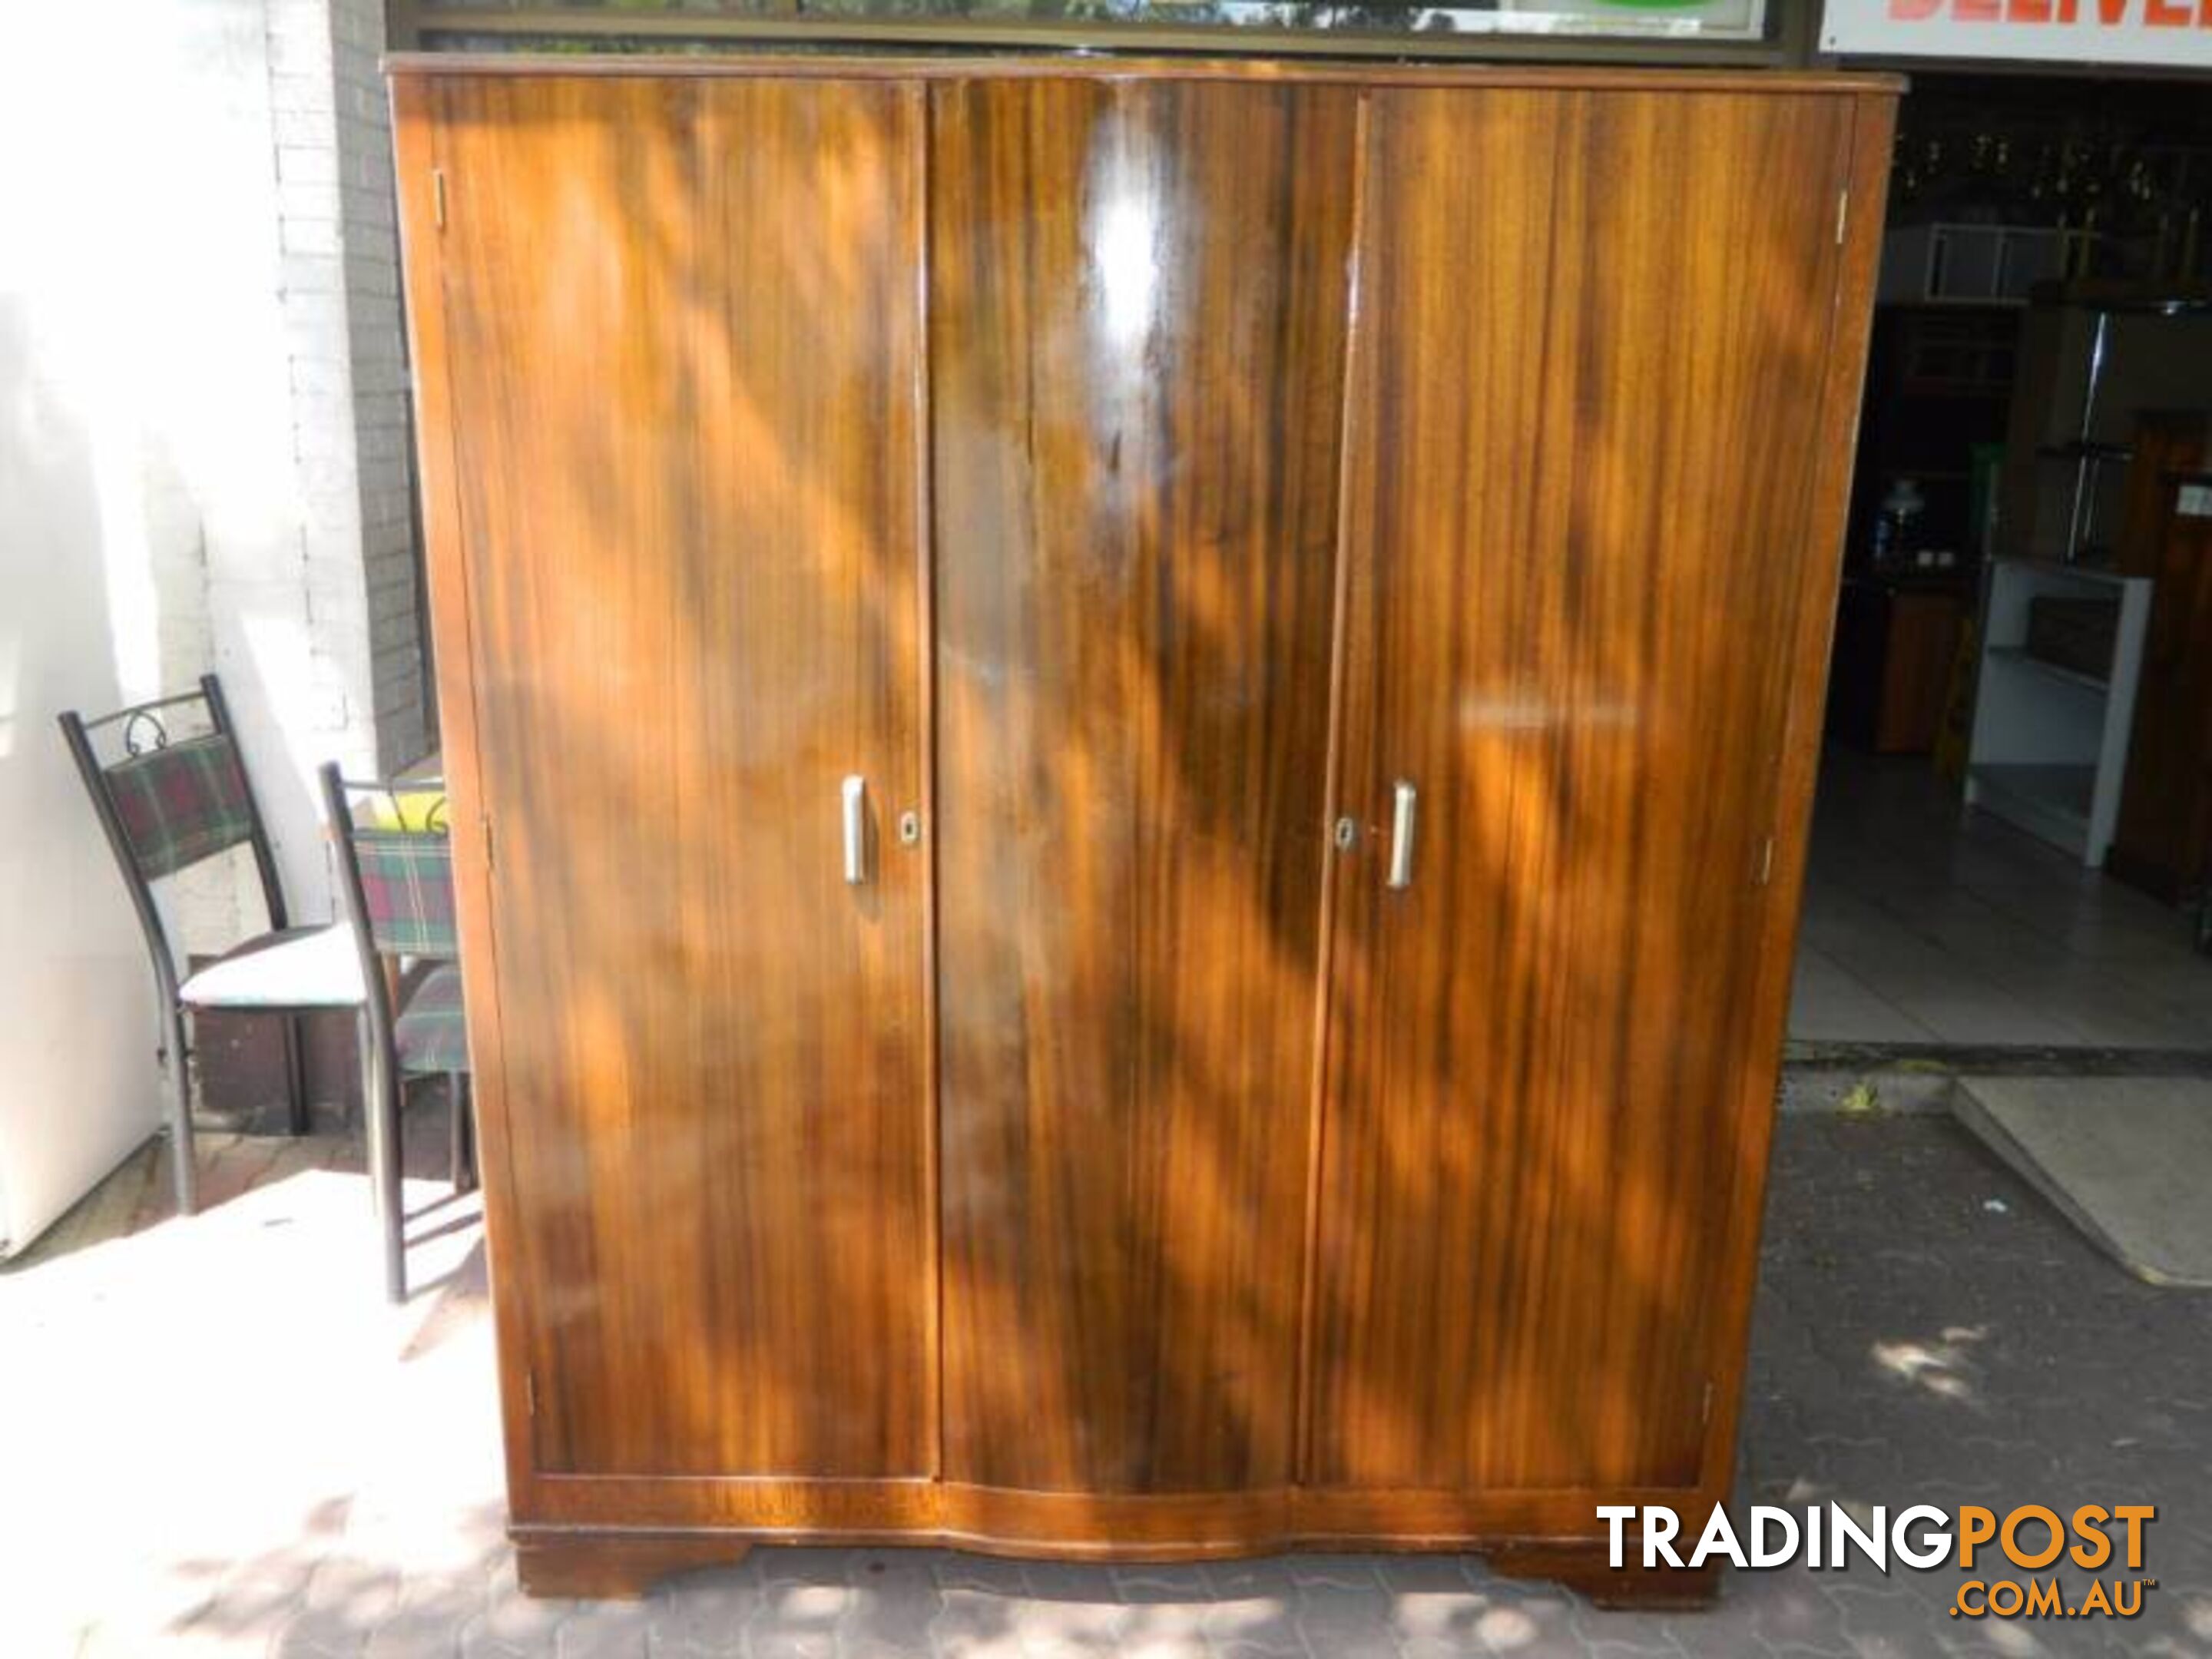 Solid Retro Timber Wardrobe with drawers inside + 2 keys !!!